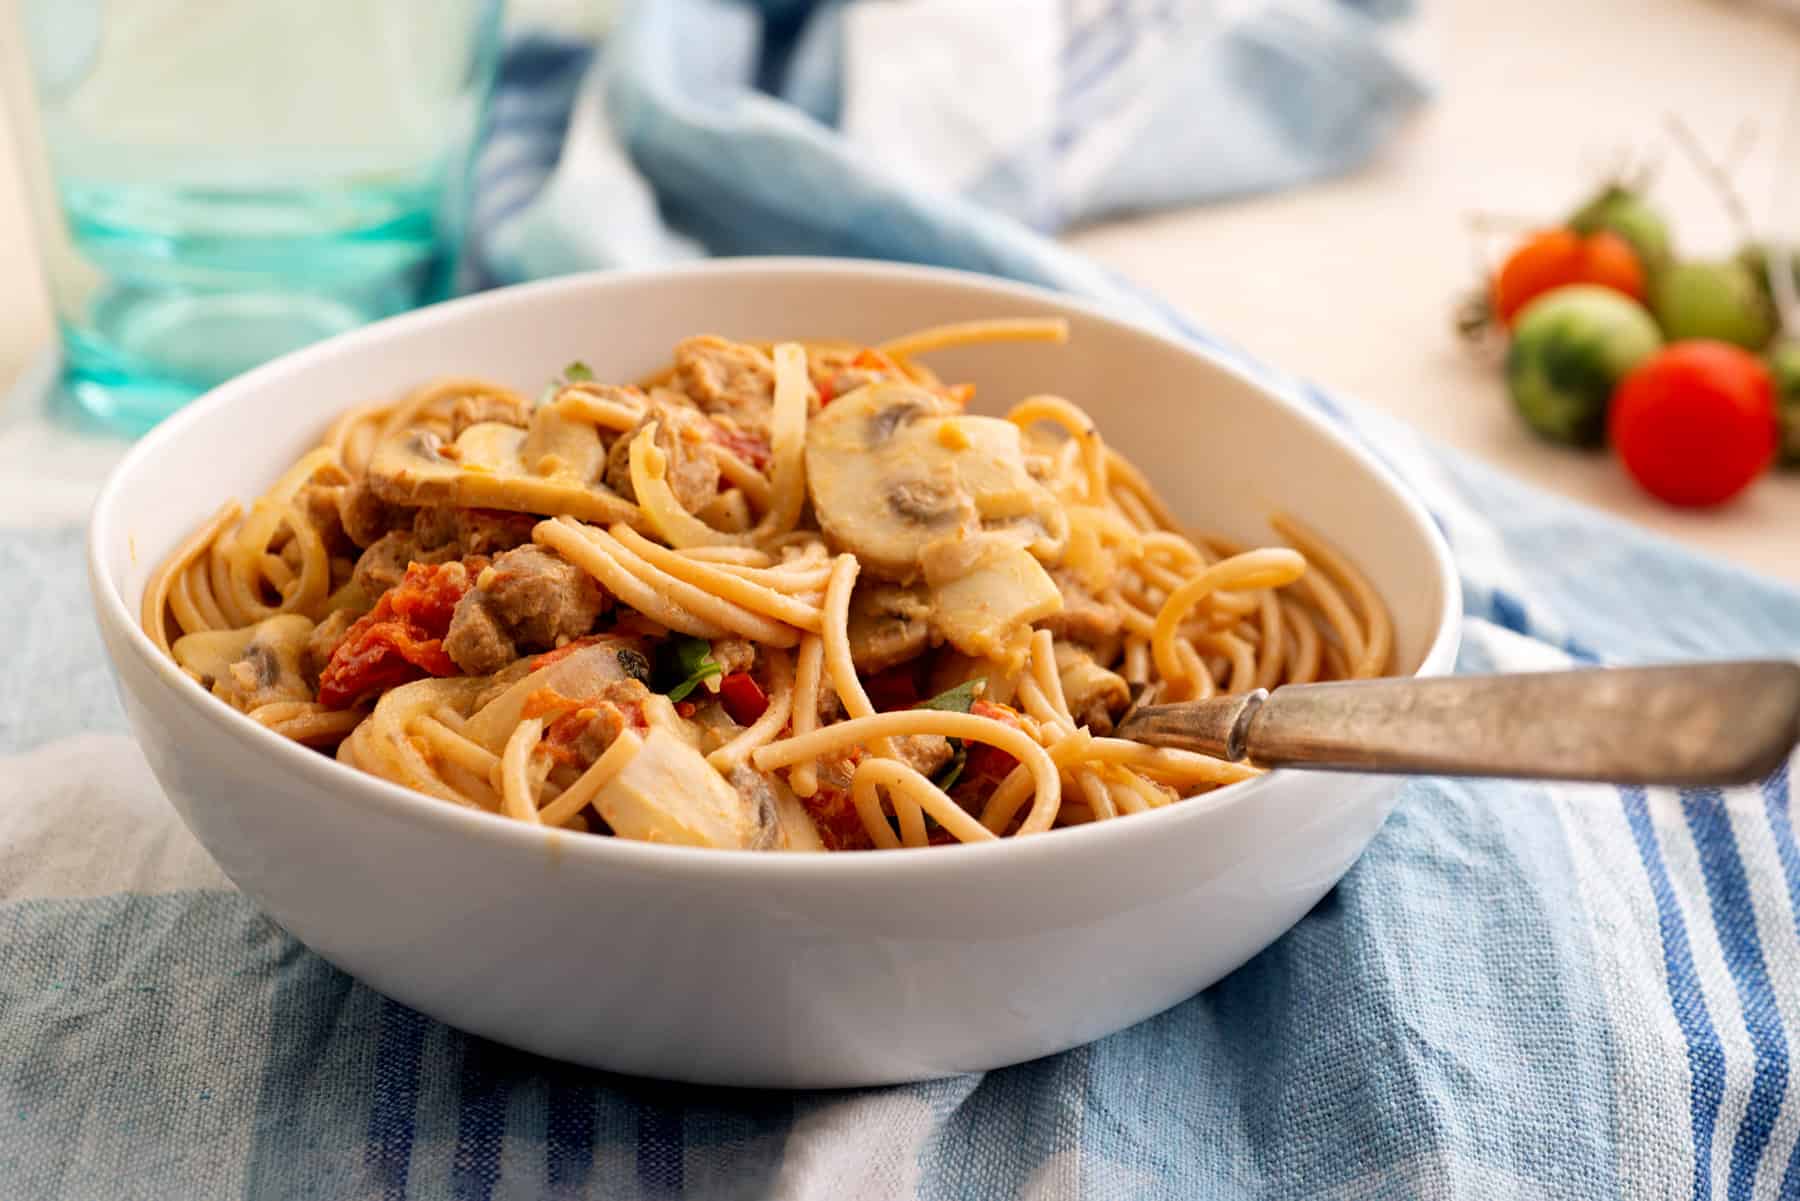 Whole wheat vegan pasta with textured soy.